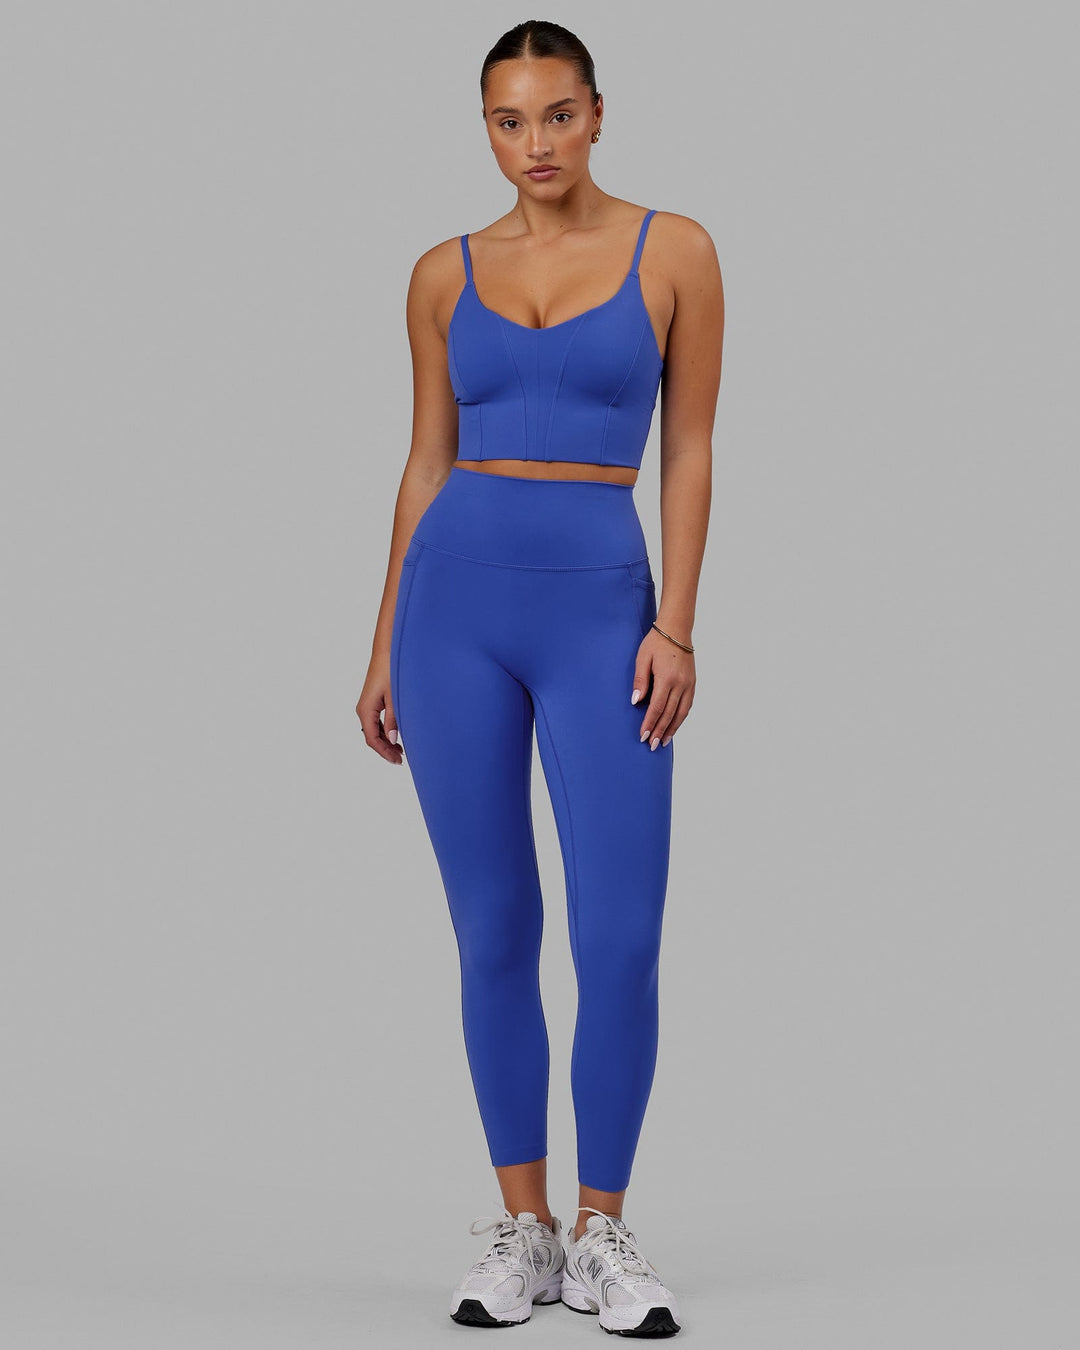 Woman wearing Elixir 7/8 Tights With Pockets - Power Cobalt